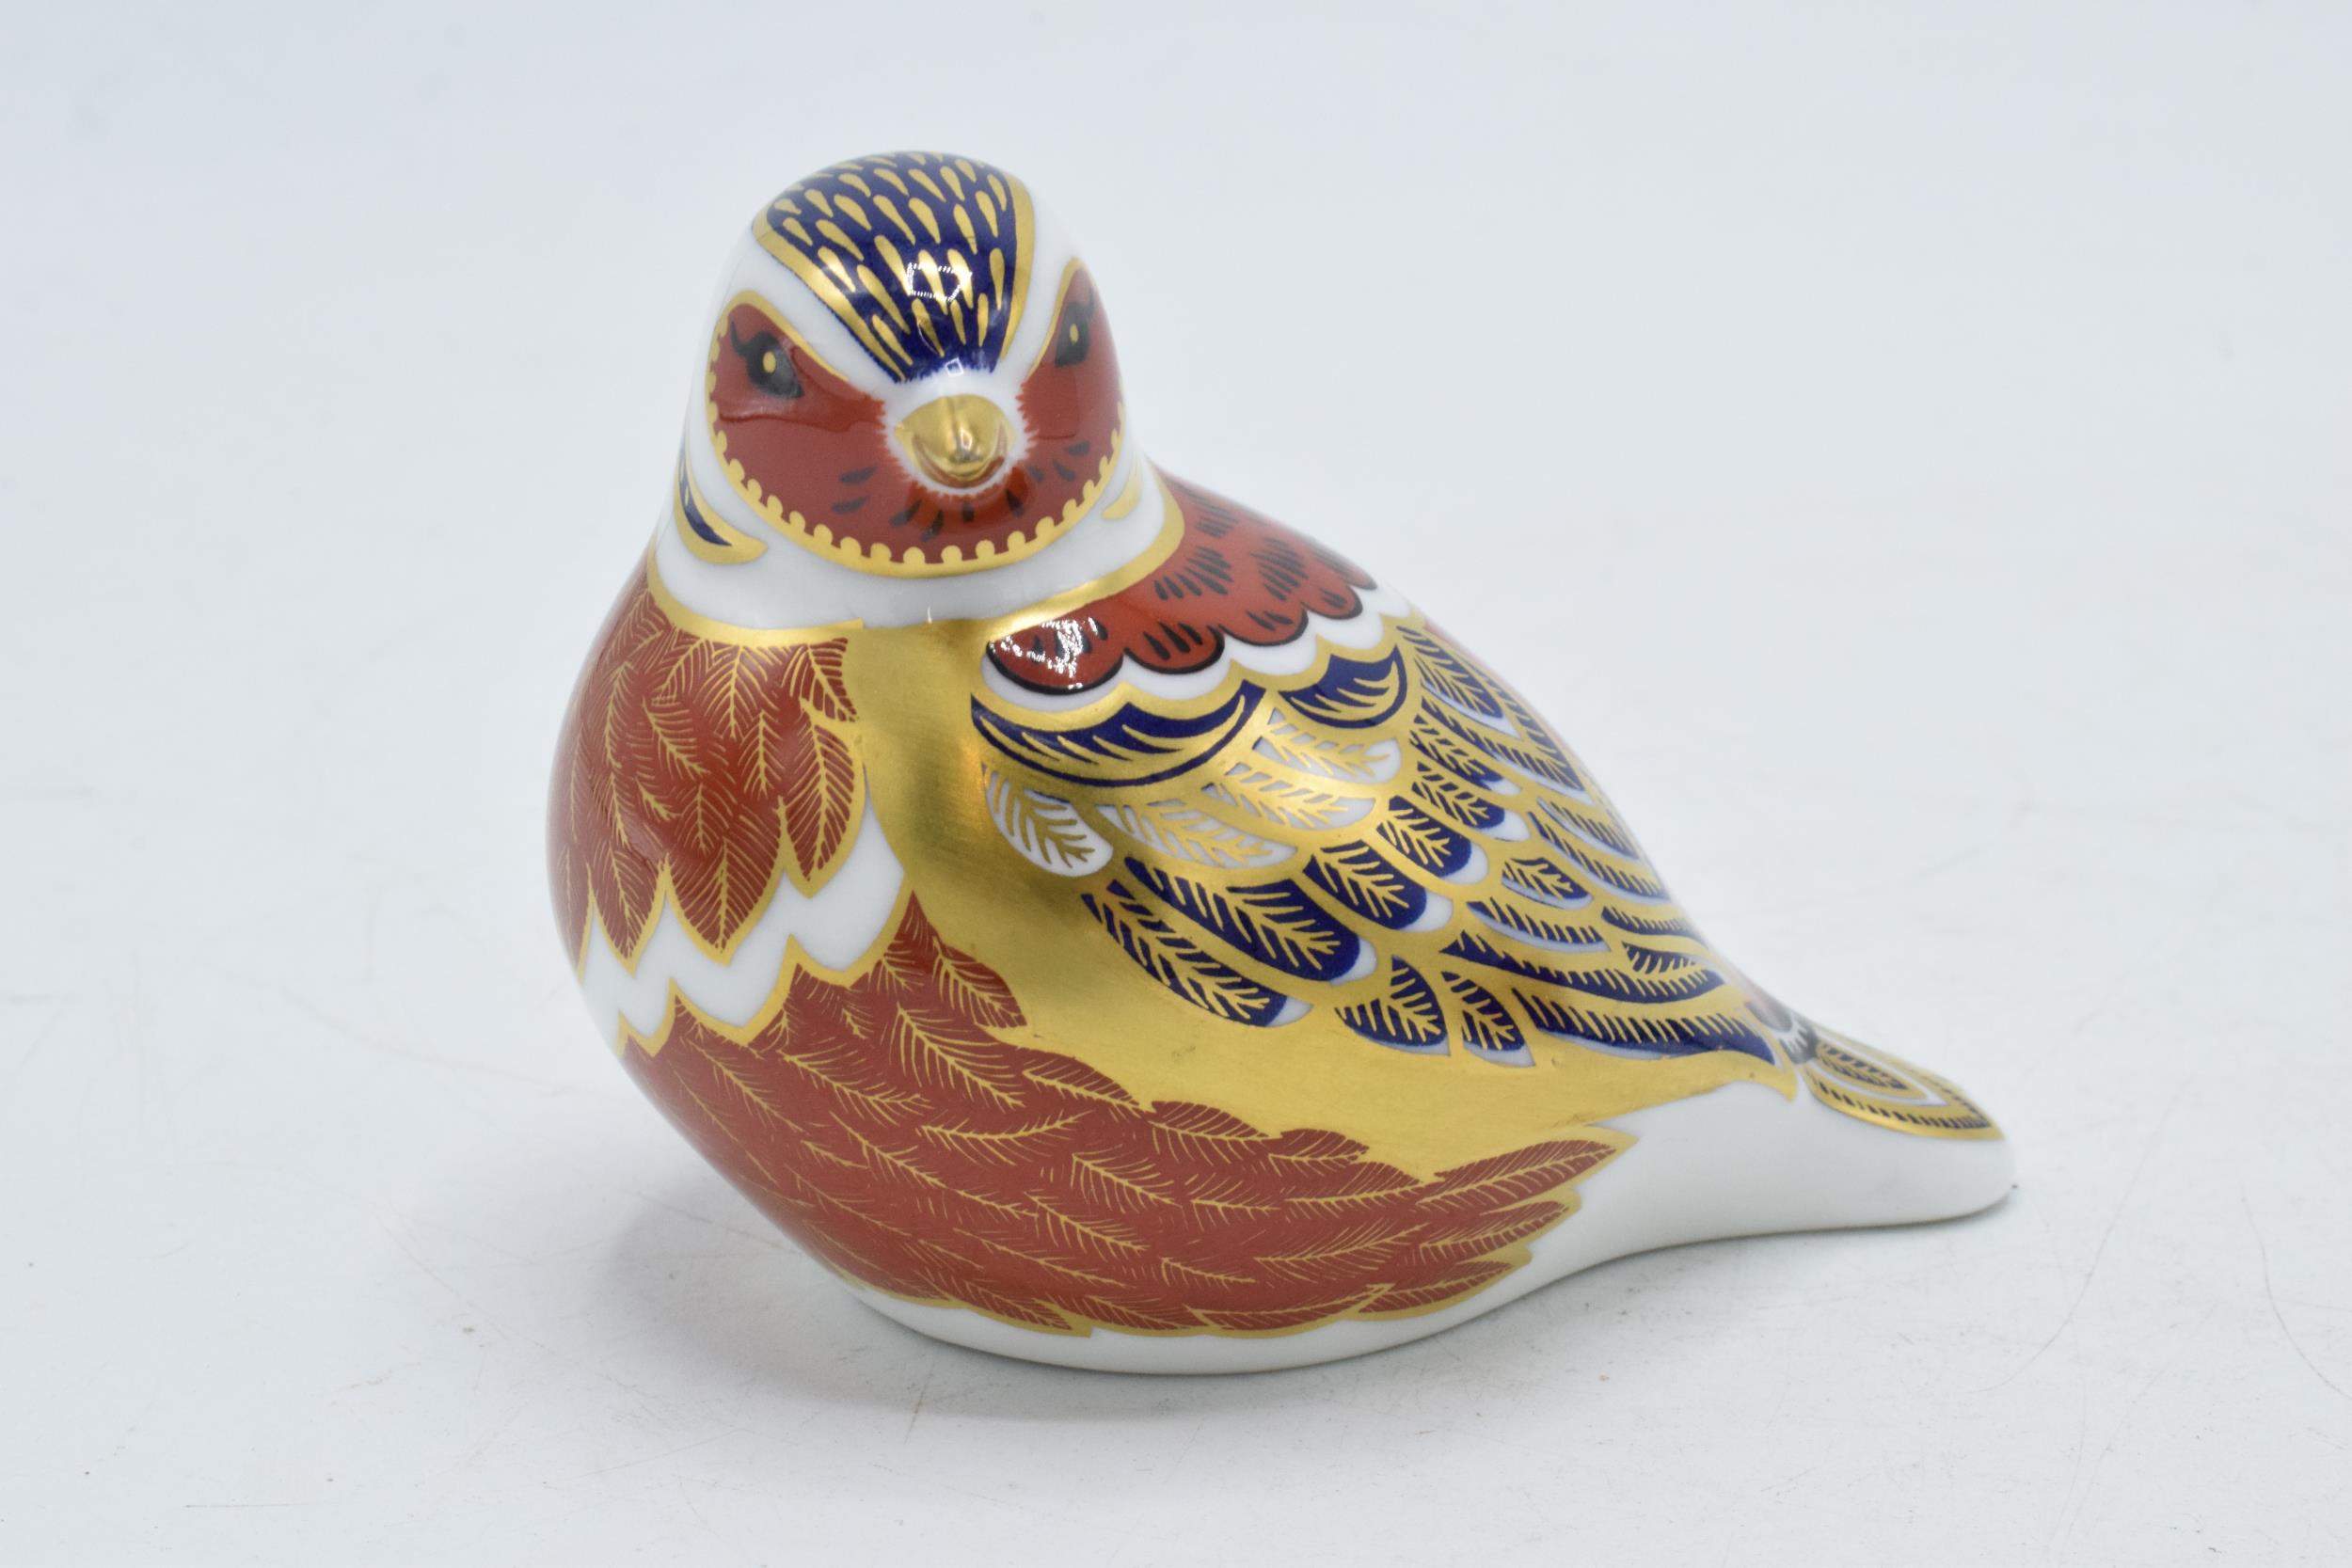 Royal Crown Derby paperweight, Chaffinch, 21st anniversary special gold stopper. In good condition